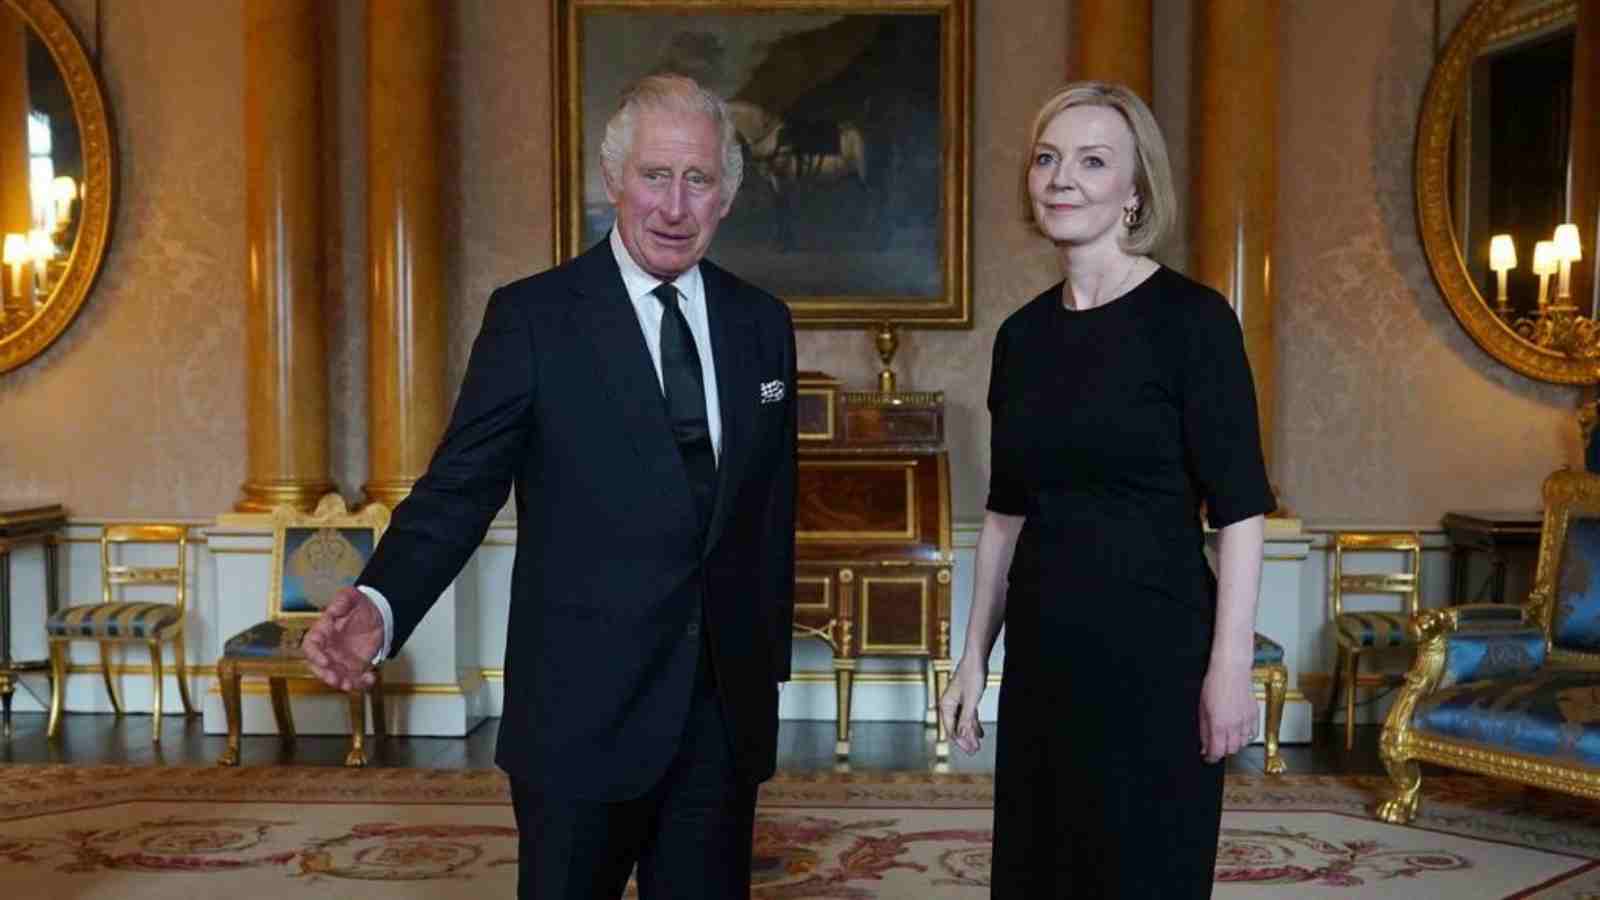 Liz Truss, the Prime Minister of UK meets King Charles